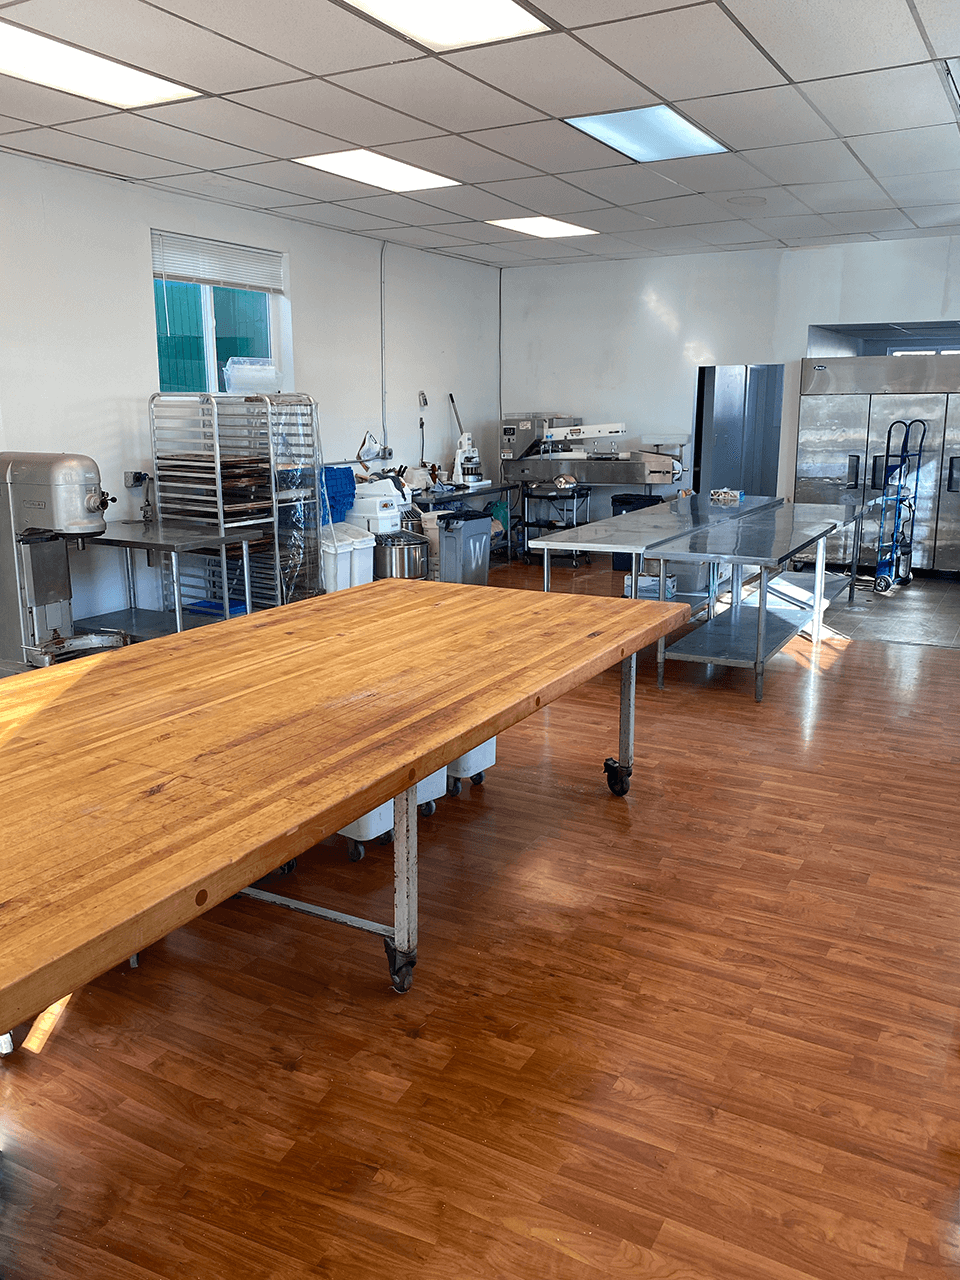 KBM-commissary-kitchen-seattle-16.png